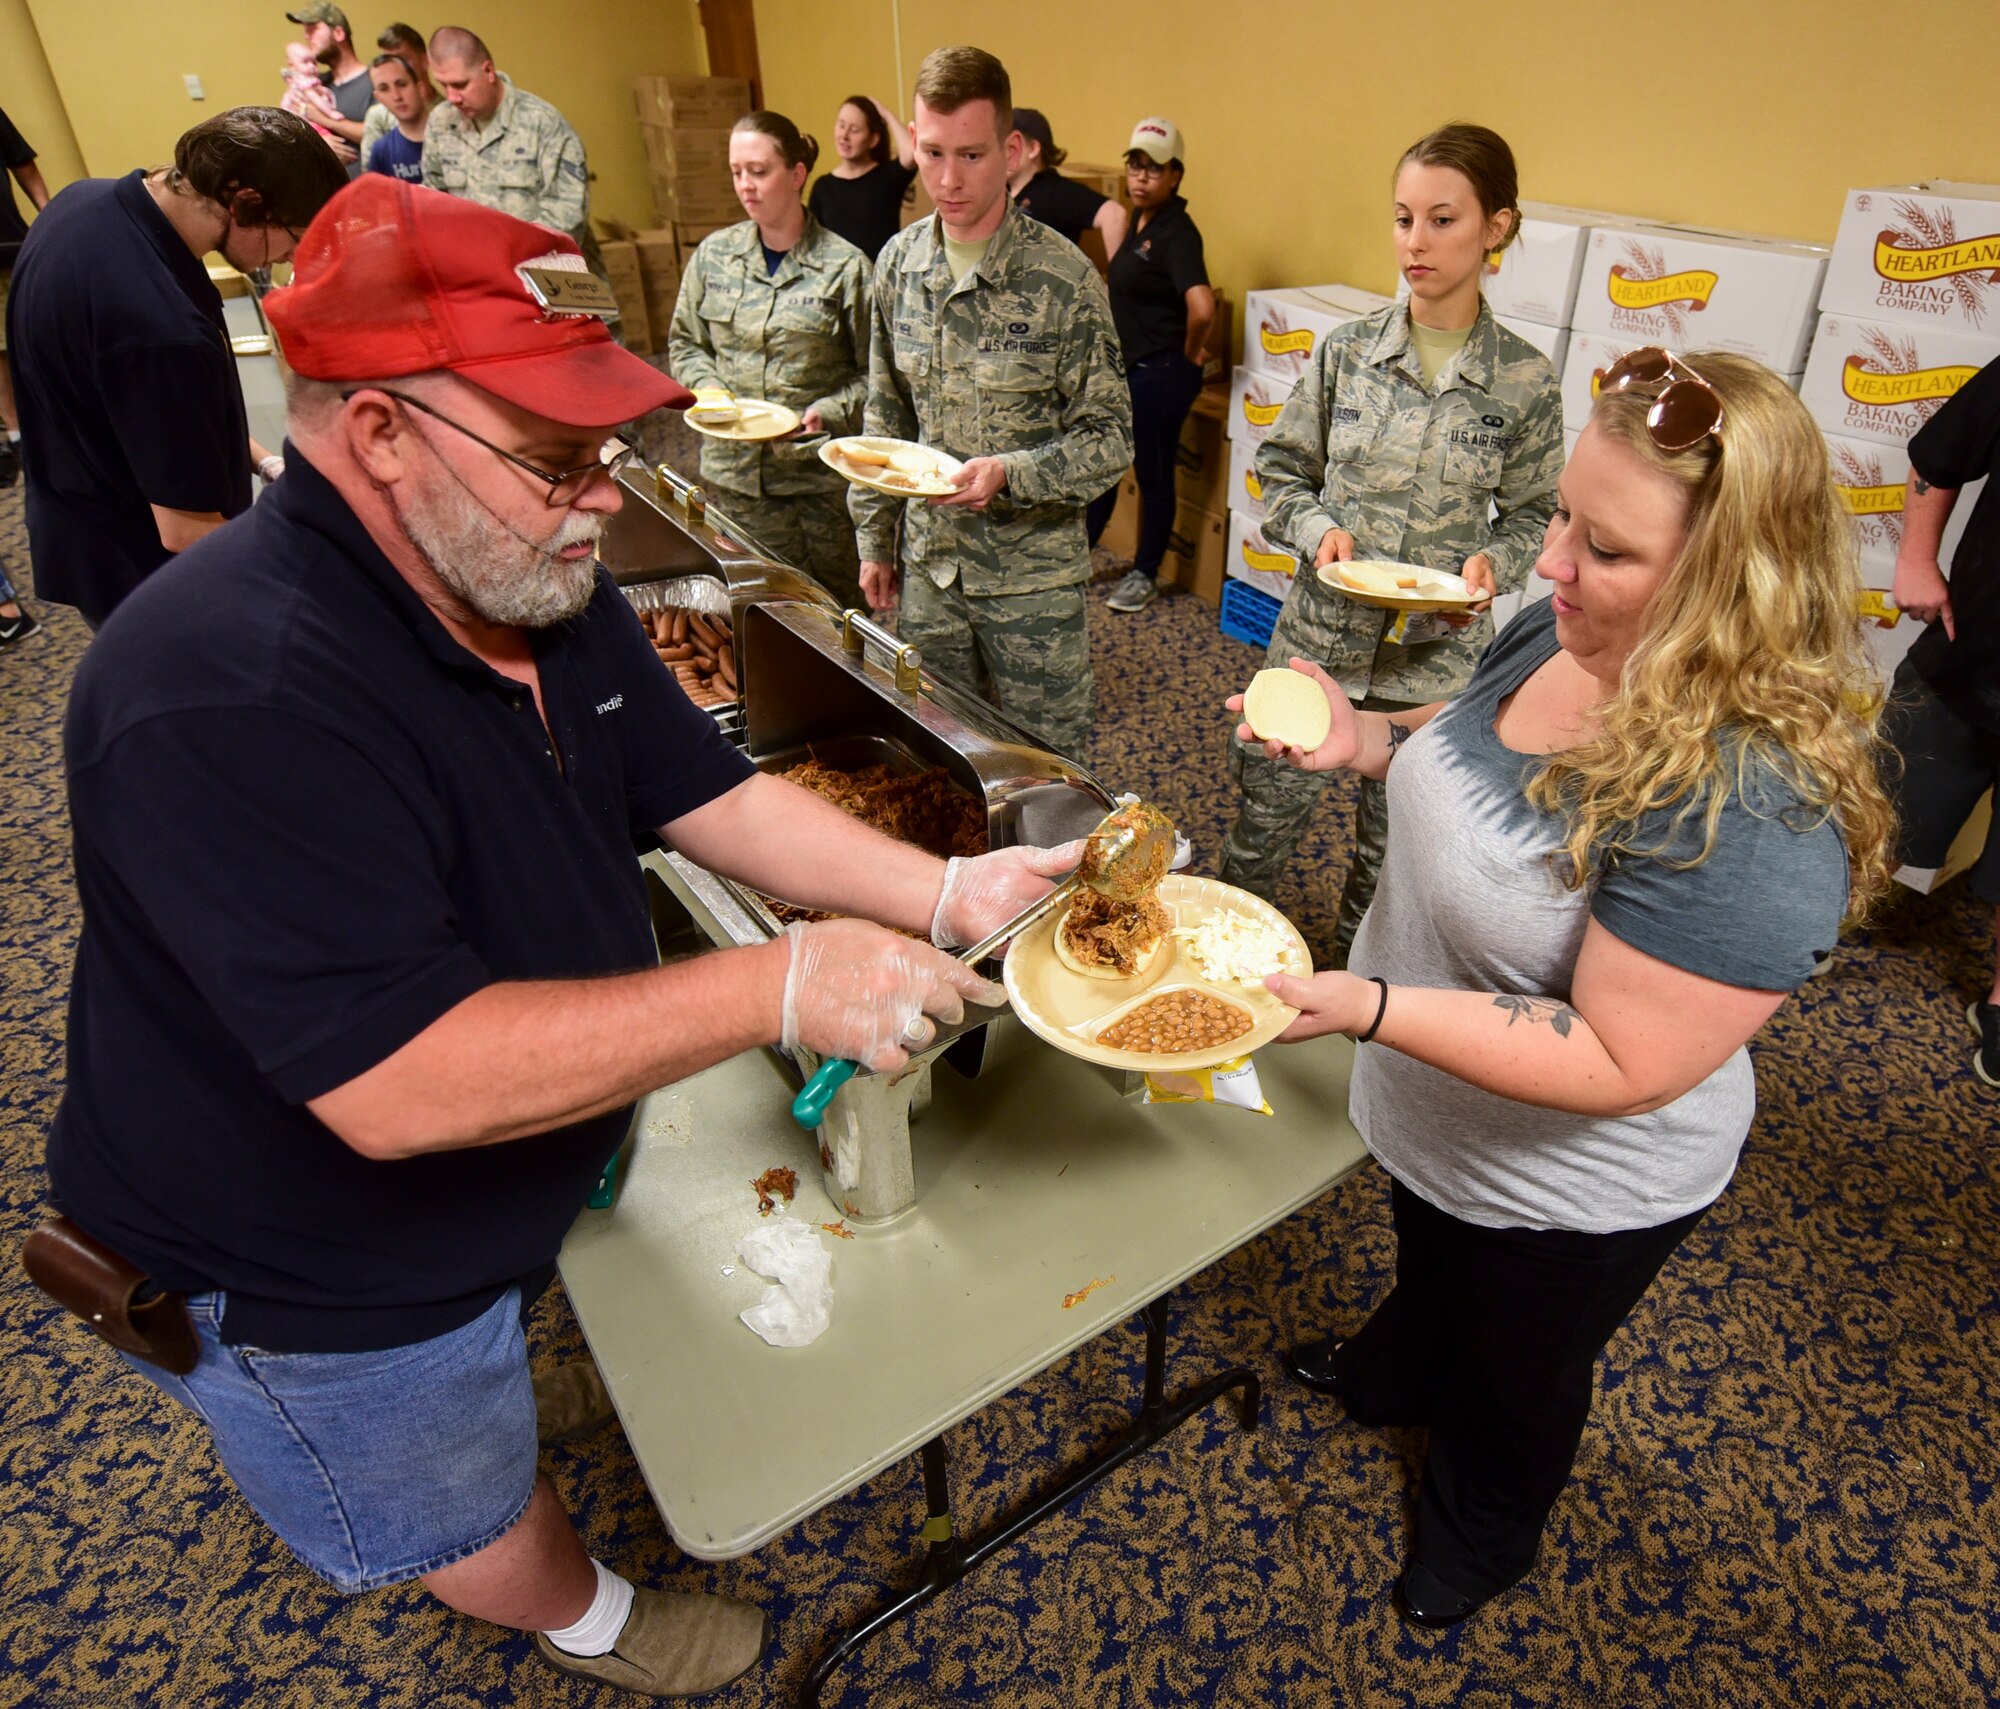 Airmen and their families go through a line to get a free barbeque lunch during the annual base picnic inside the Dakota’s Club on Ellsworth Air Force Base, S.D., June 22, 2018. The lunch was sponsored by local businesses and organizations. (U.S. Air Force photo by Senior Airman Randahl J. Jenson)